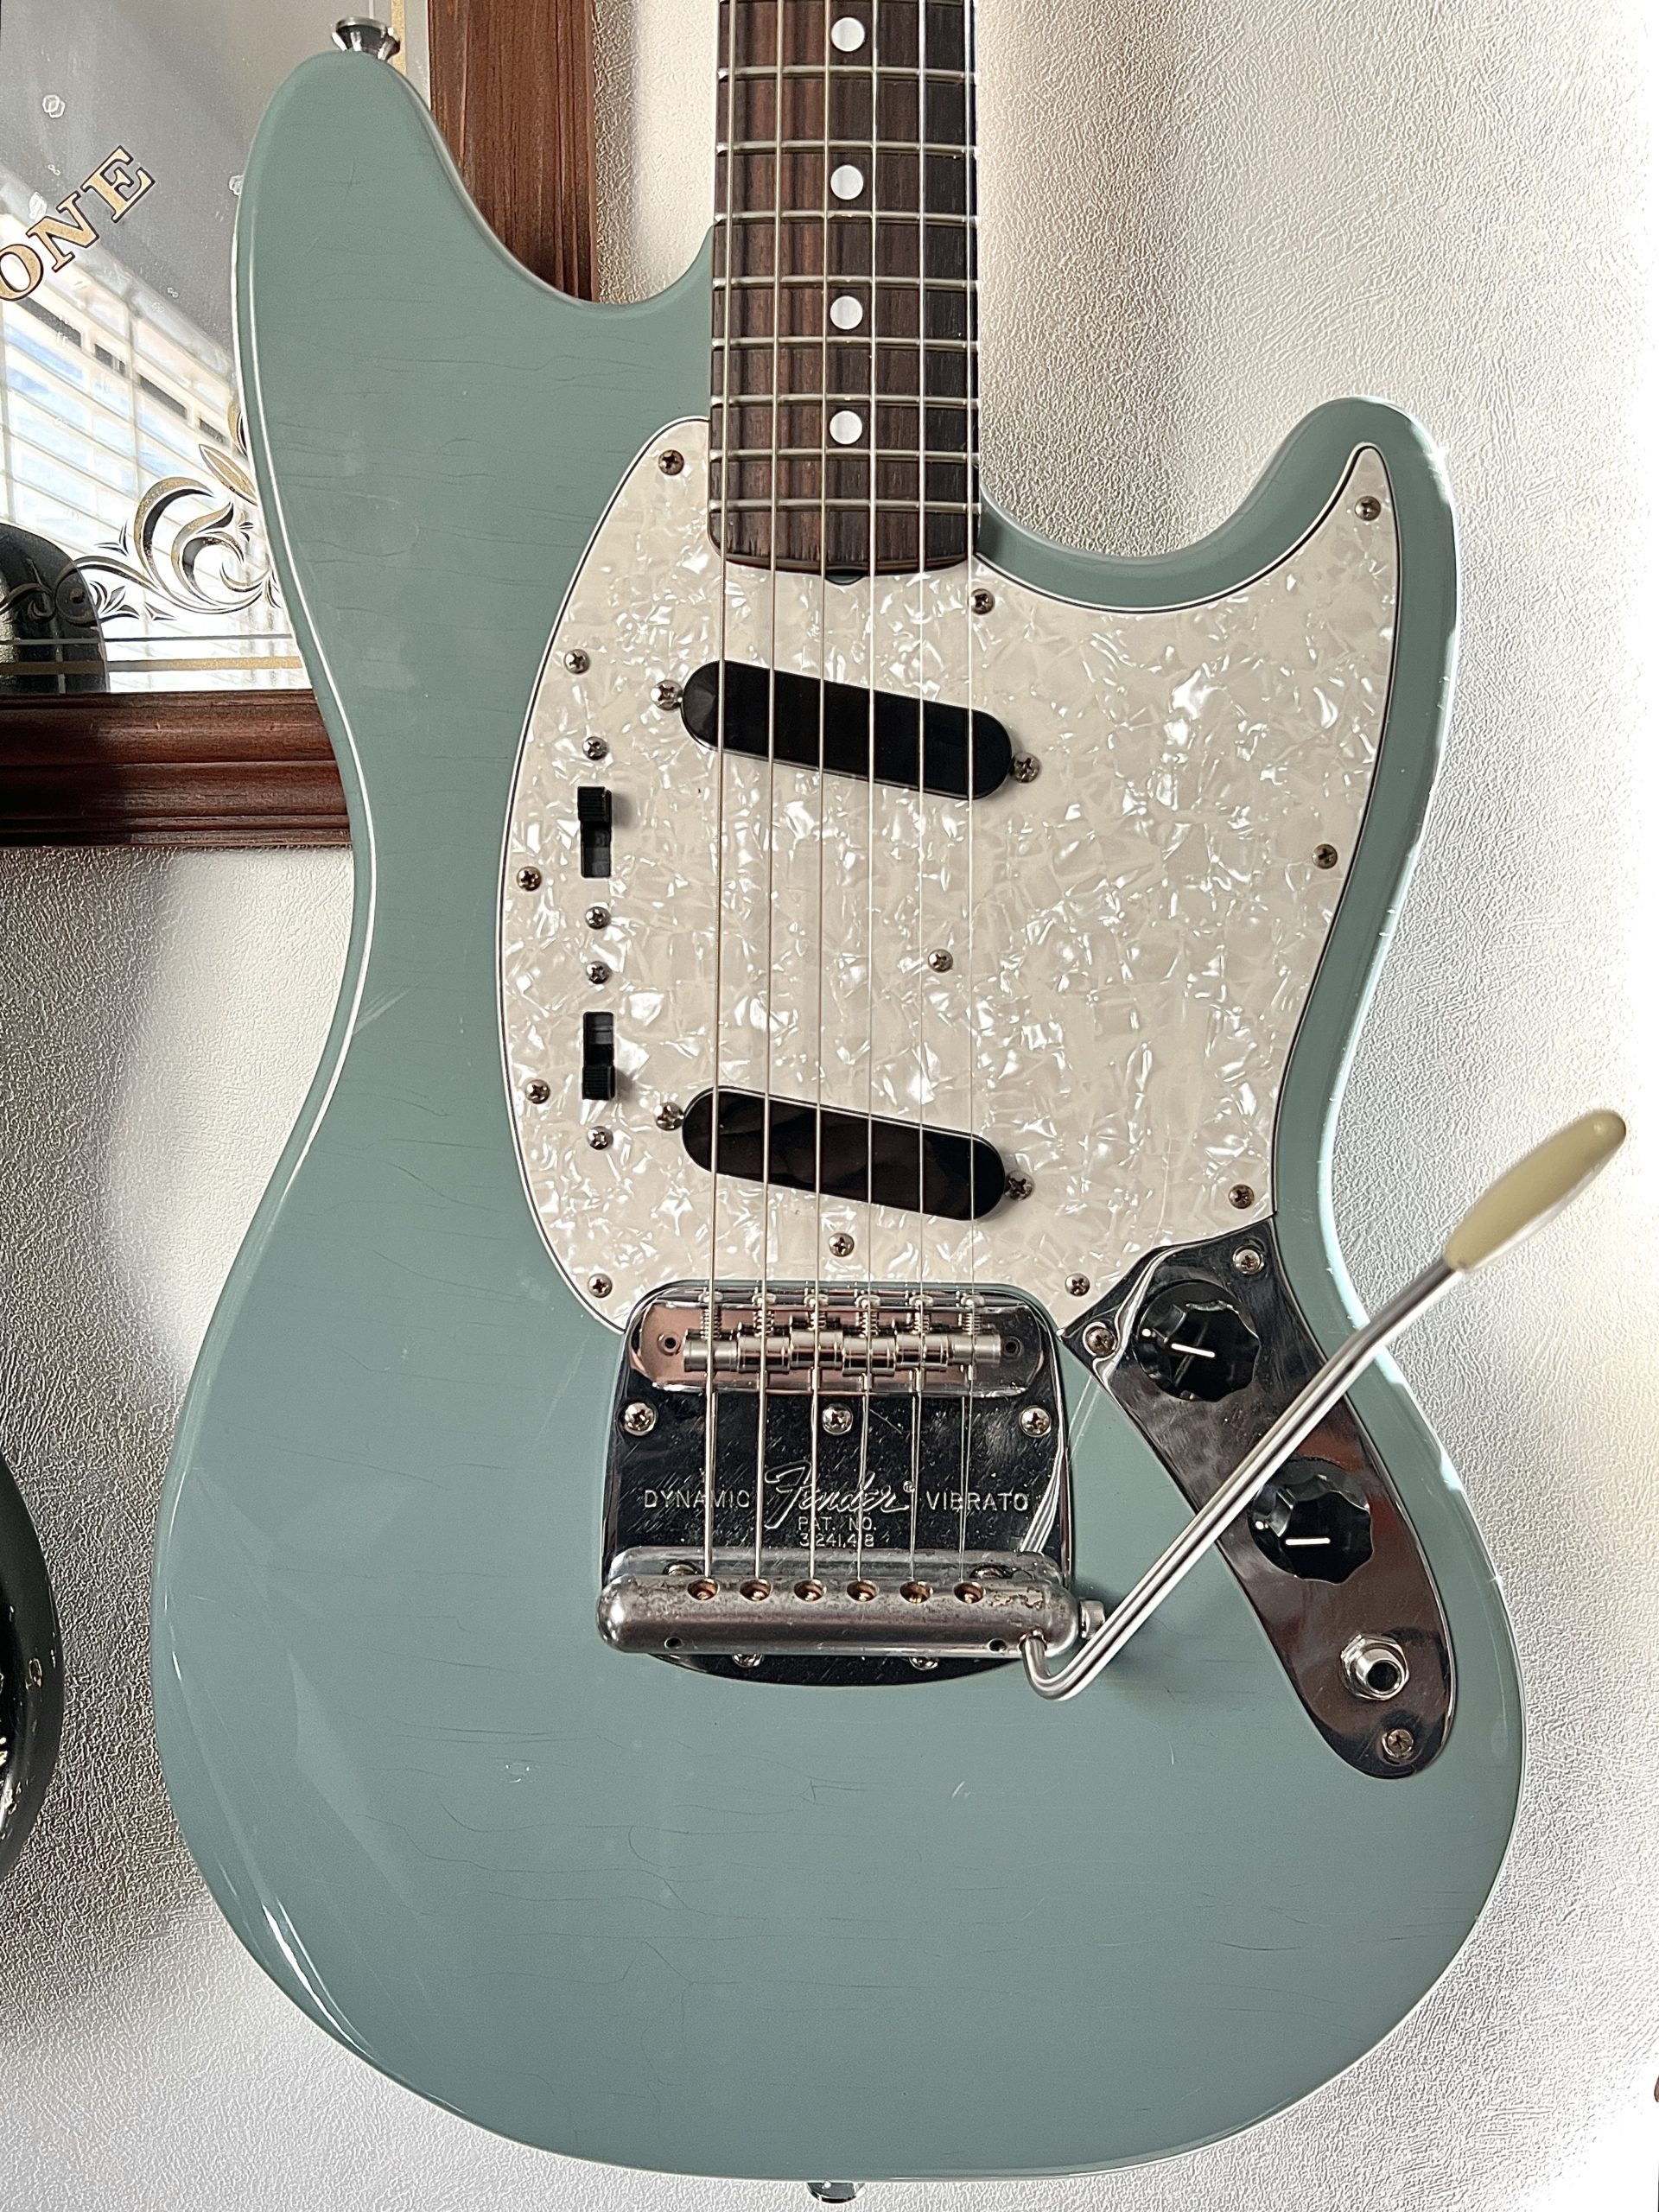 Lollar Mustang Pickup Neck Bridge Squier By Fender Bullet Mustang HH 2021 Sonic Gray made in China ローレル指板 ムスタング スクワイヤー Mustang Dynamic Vibrato Lindy Fralin Fat '50s